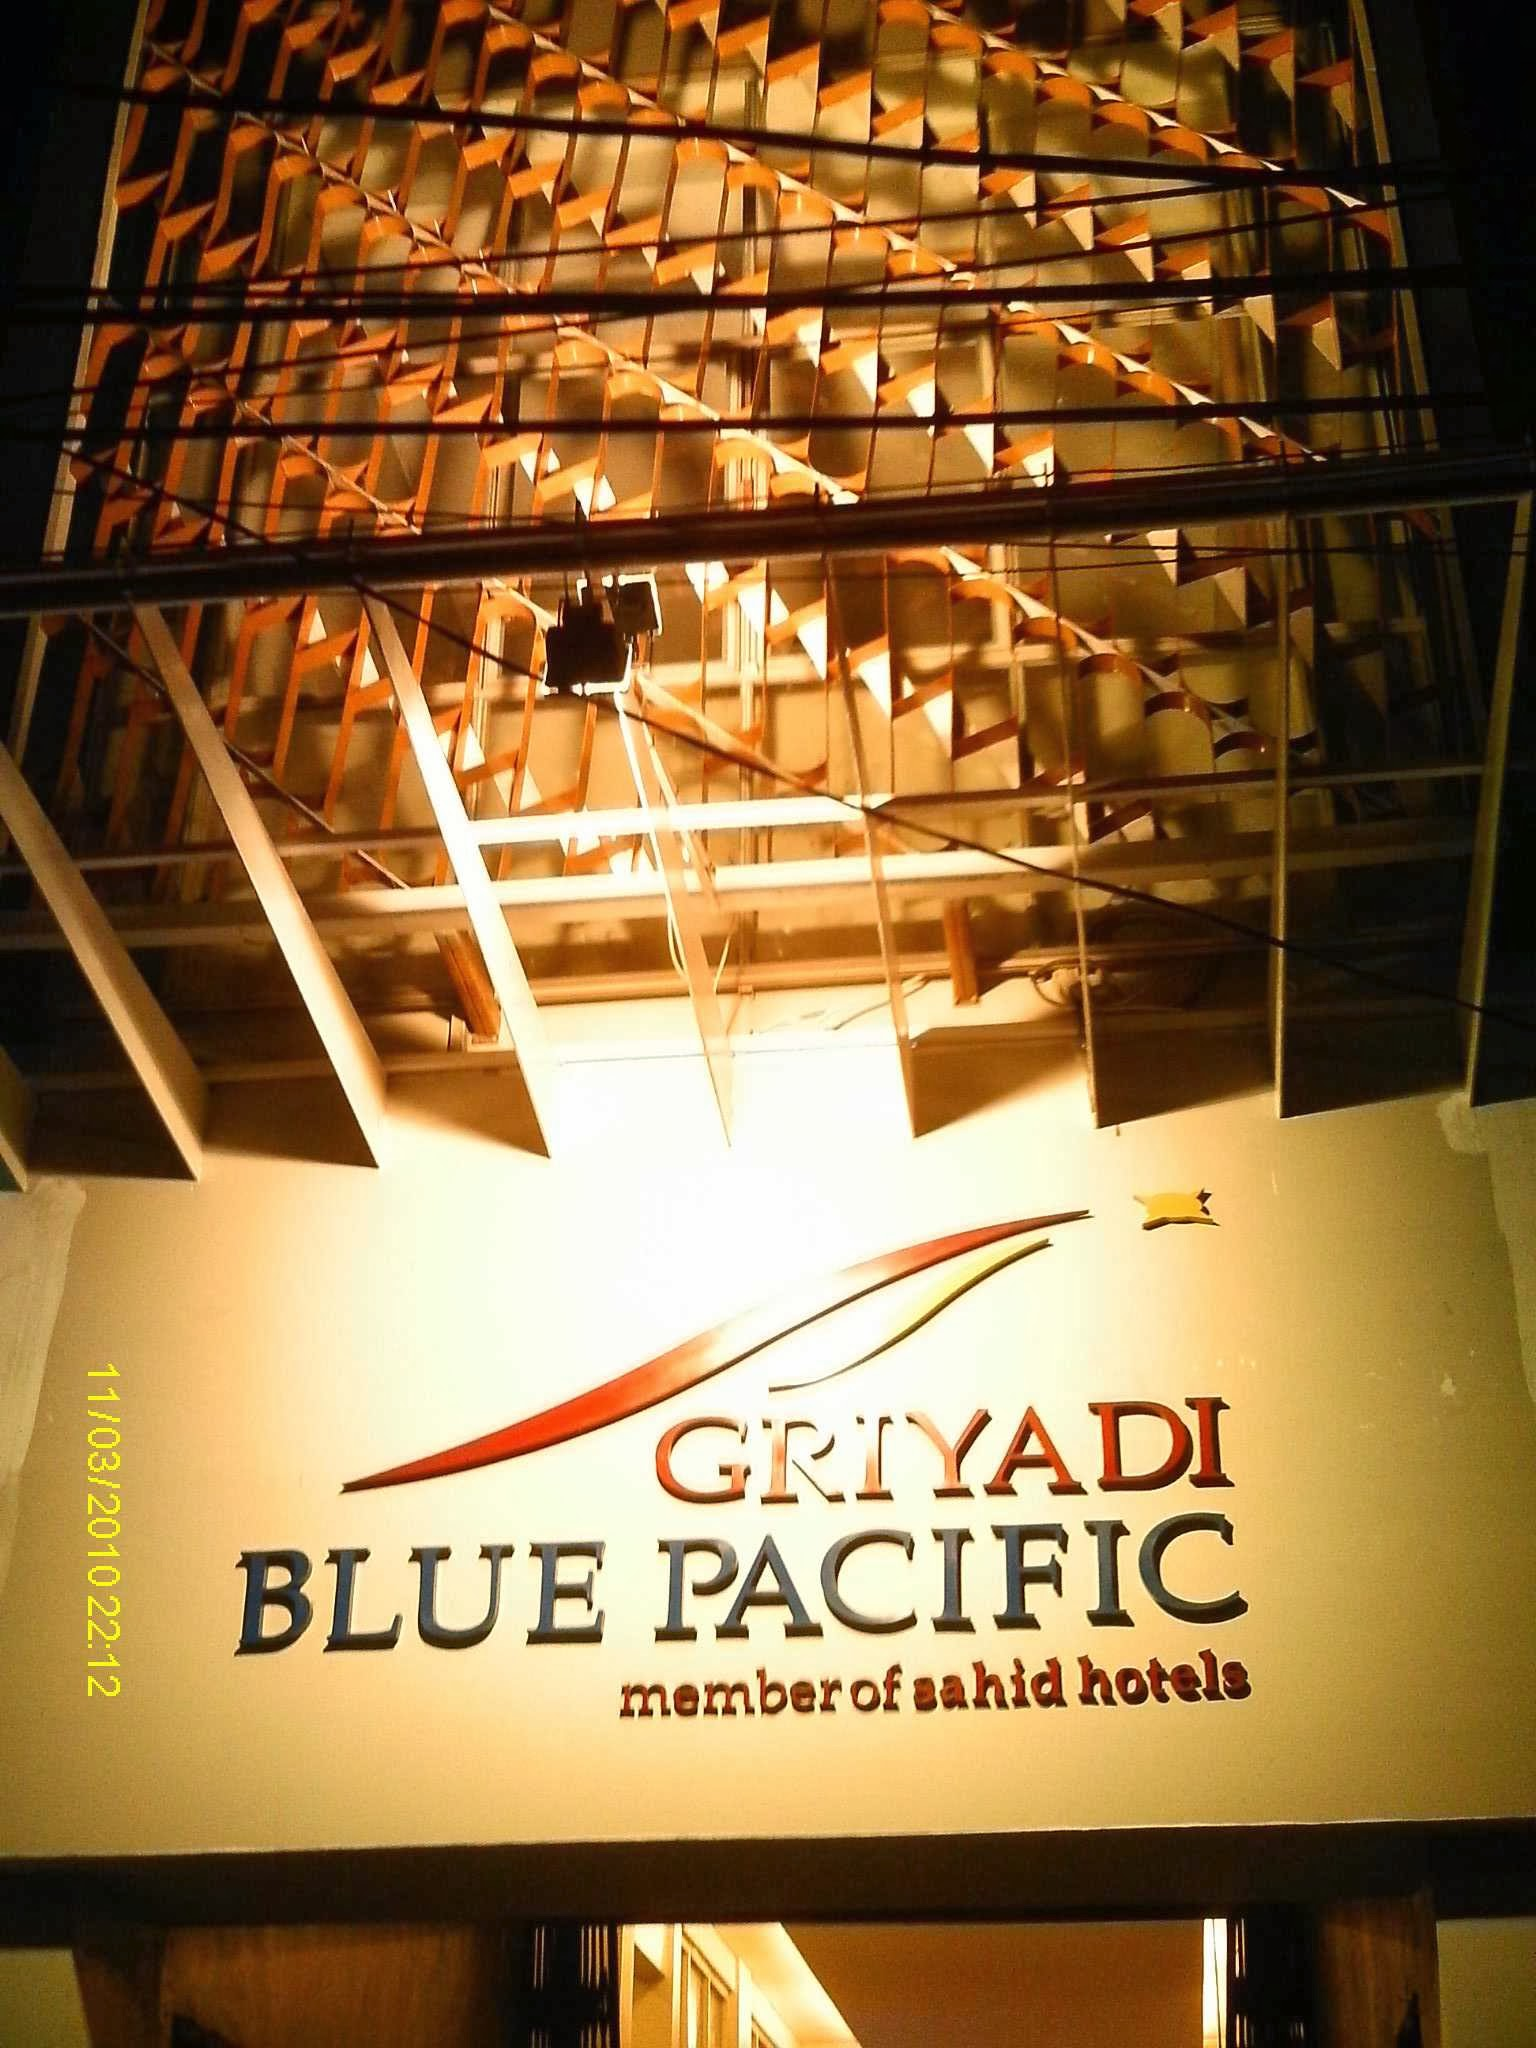 Hotel Blue Pacific, South Jakarta